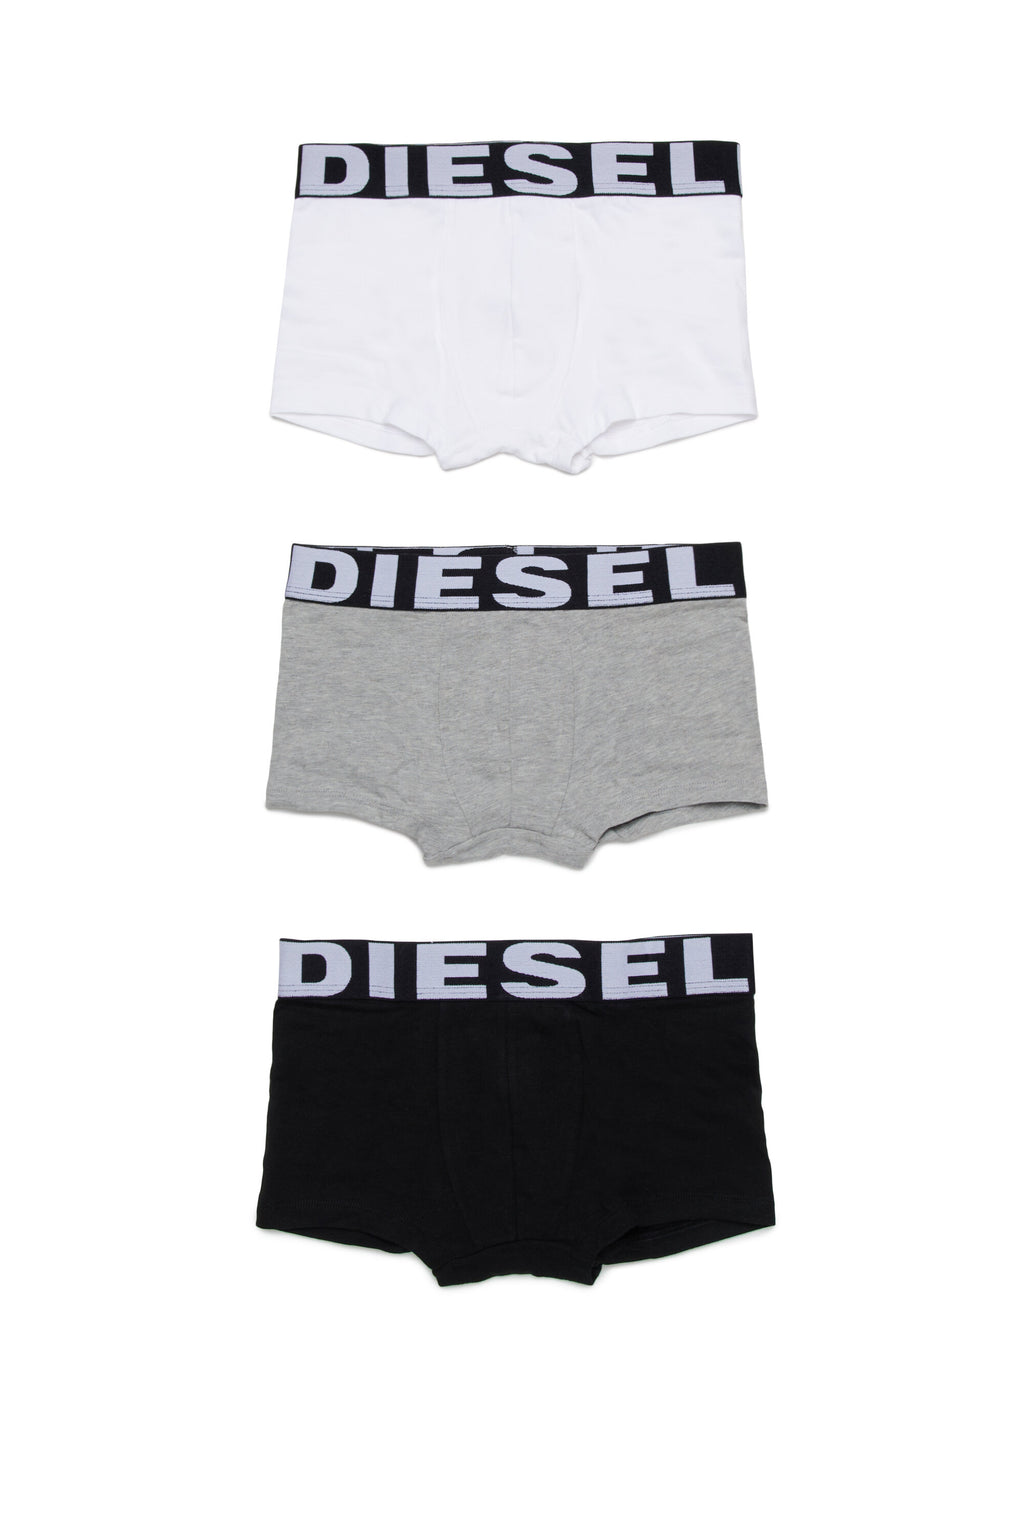 Branded jersey boxer shorts - 3 pairs